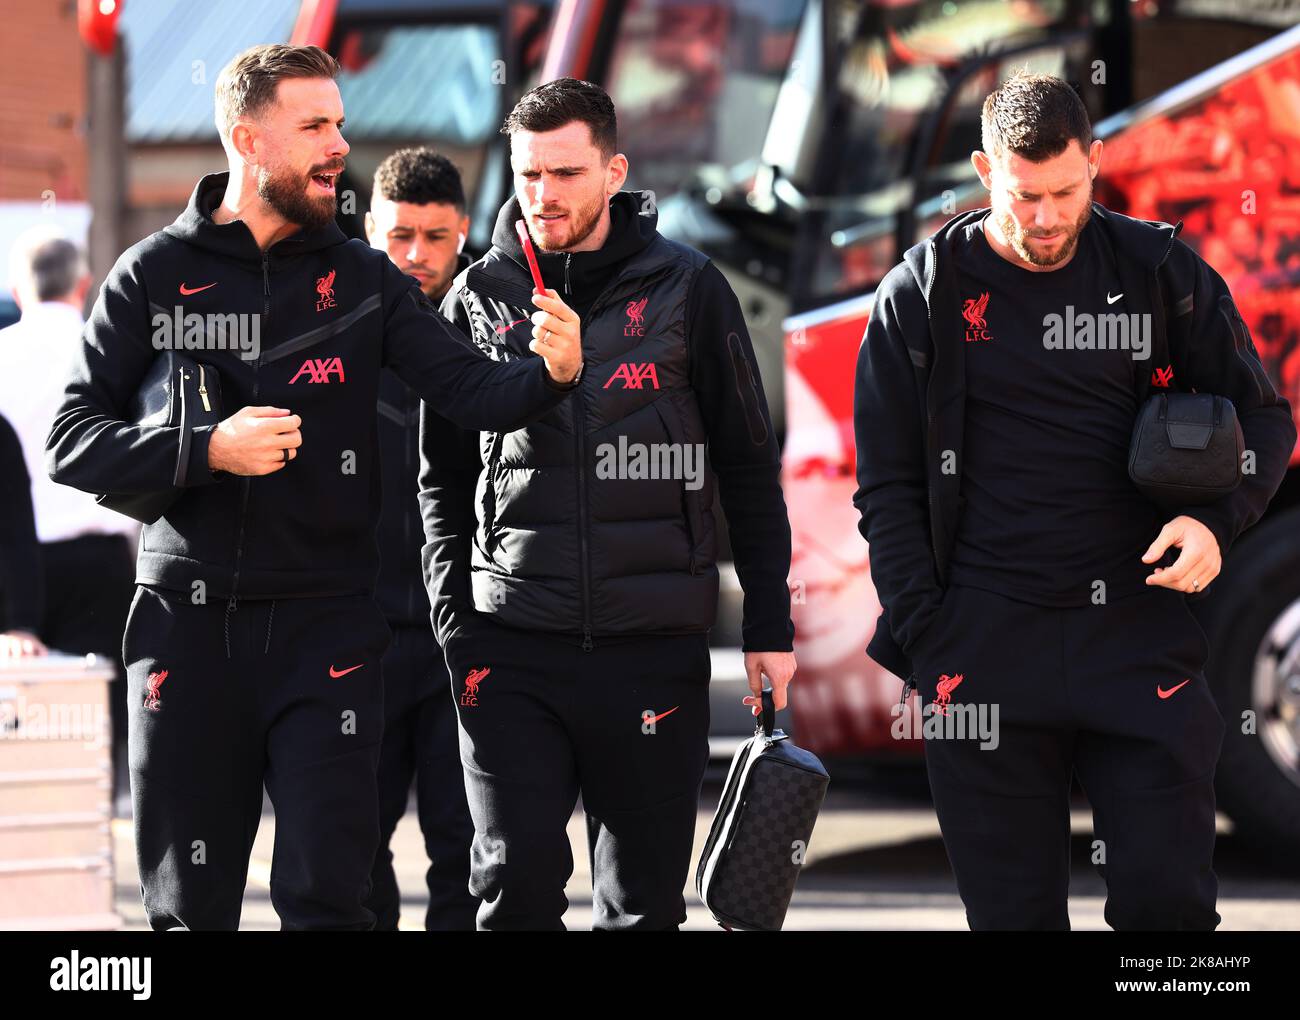 Nottingham, UK. 22nd Oct, 2022. James Milner (R) Andrew Robertson (C) and Jordan Henderson of Liverpool arrive for the the Premier League match at the City Ground, Nottingham. Picture credit should read: Darren Staples/Sportimage Credit: Sportimage/Alamy Live News Stock Photo